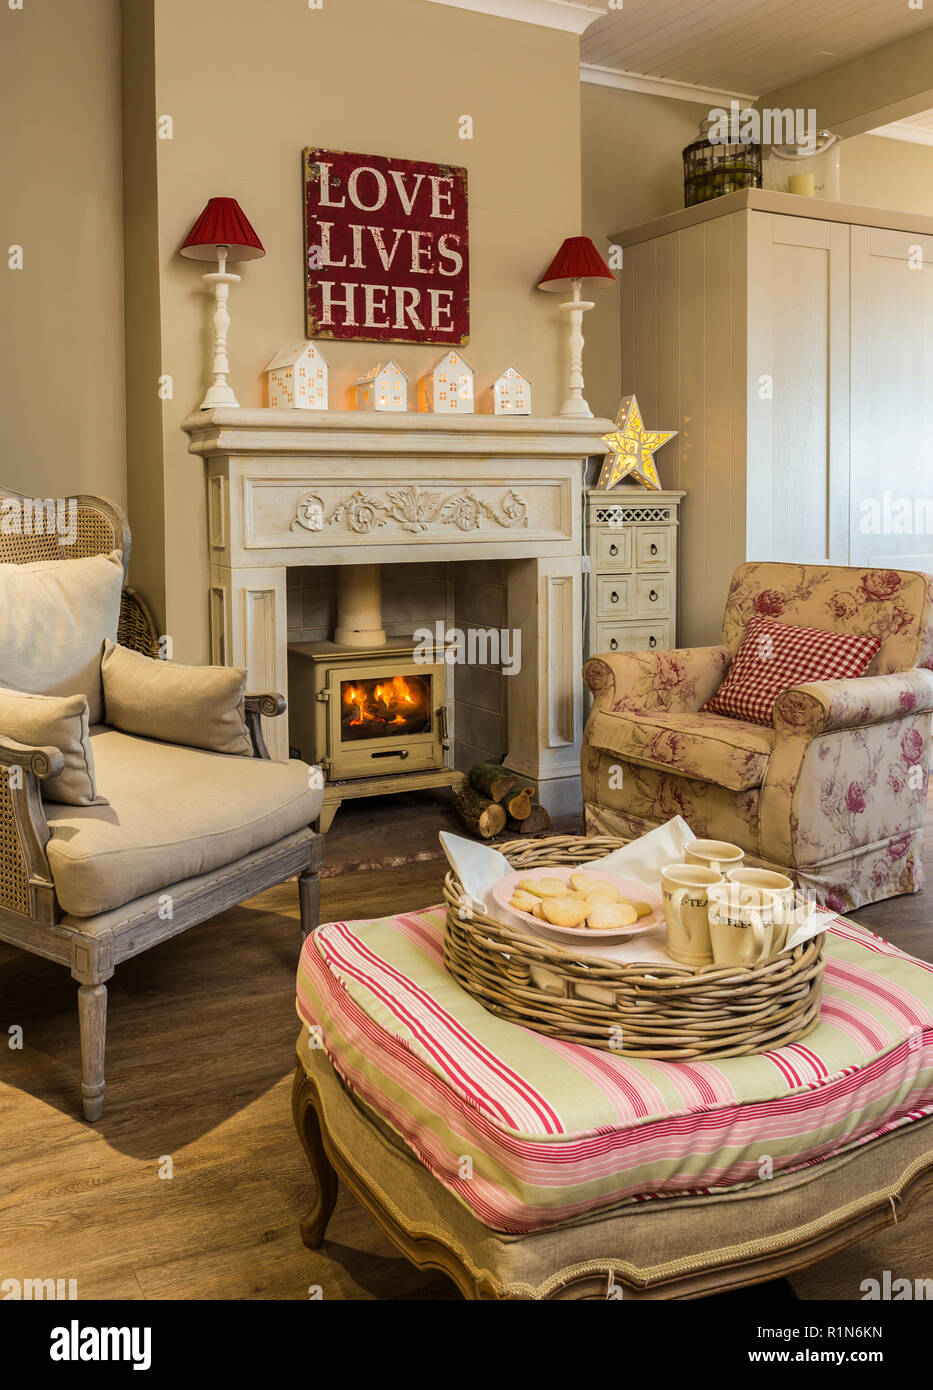 Cosy sitting area with wood burner Stock Photo